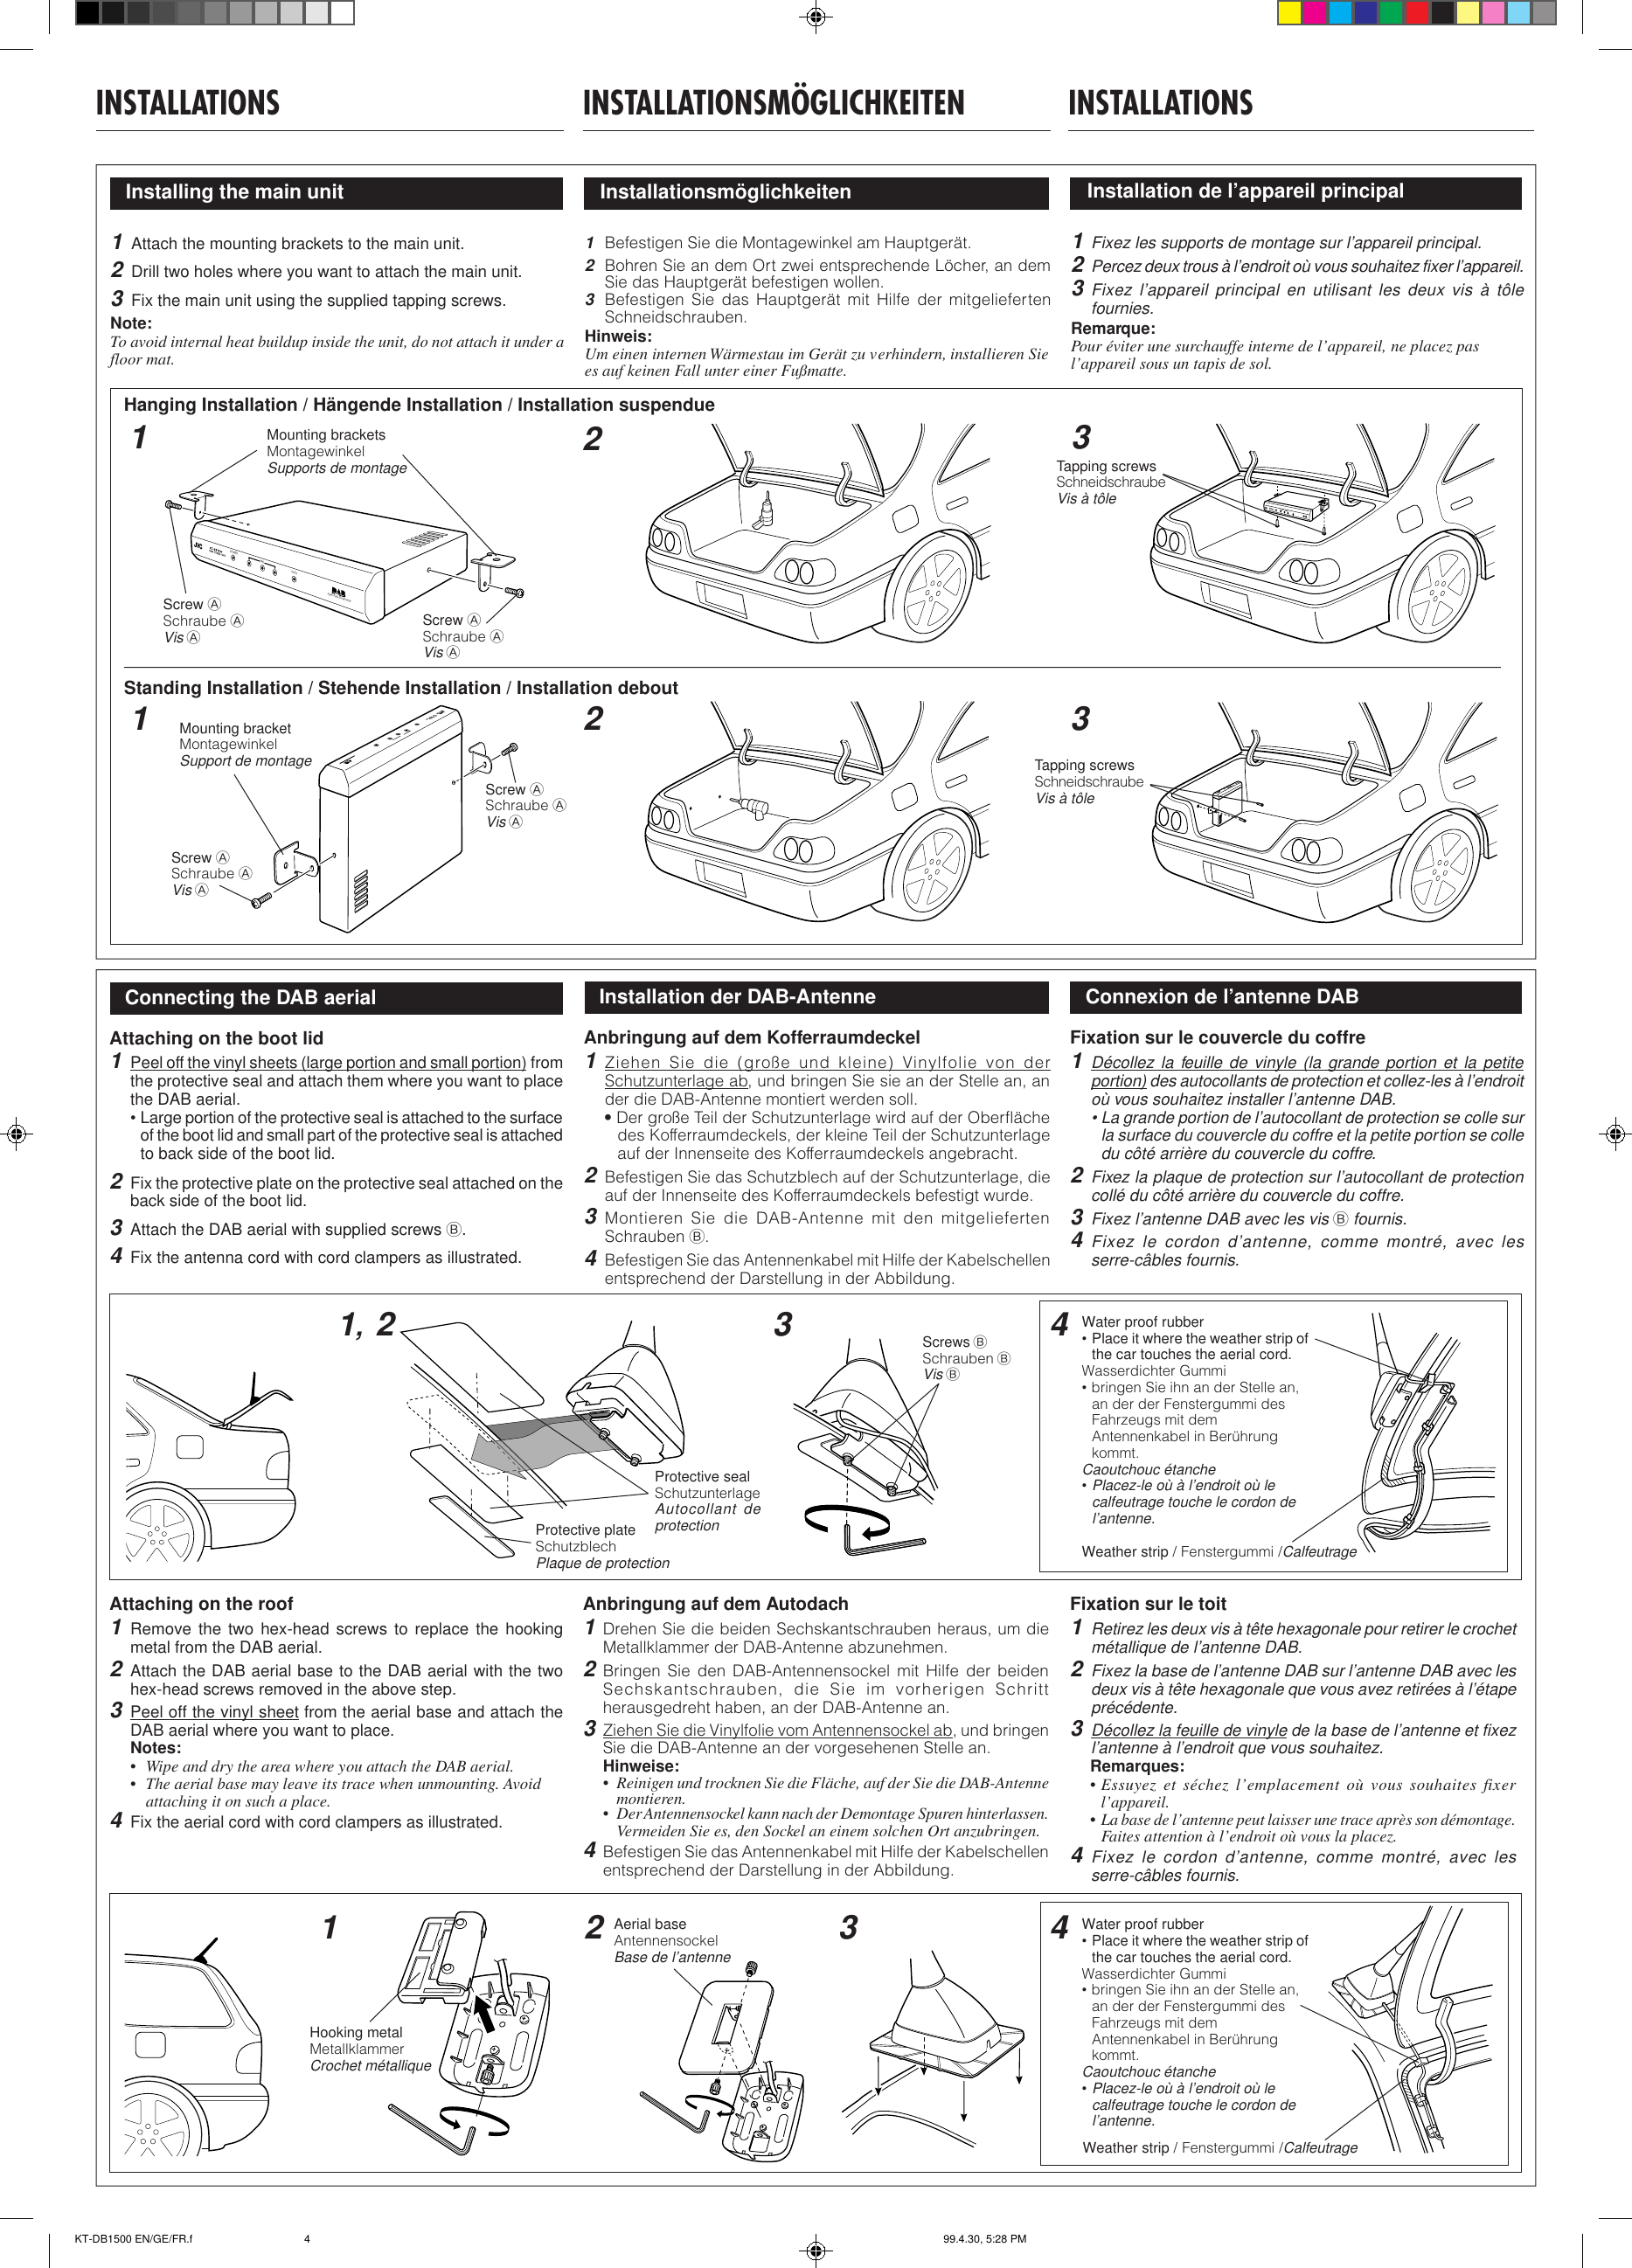 Page 4 of 4 - Jvc Jvc-Stereo-System-Kt-Db1500-Users-Manual- KT-DB1500  Jvc-stereo-system-kt-db1500-users-manual